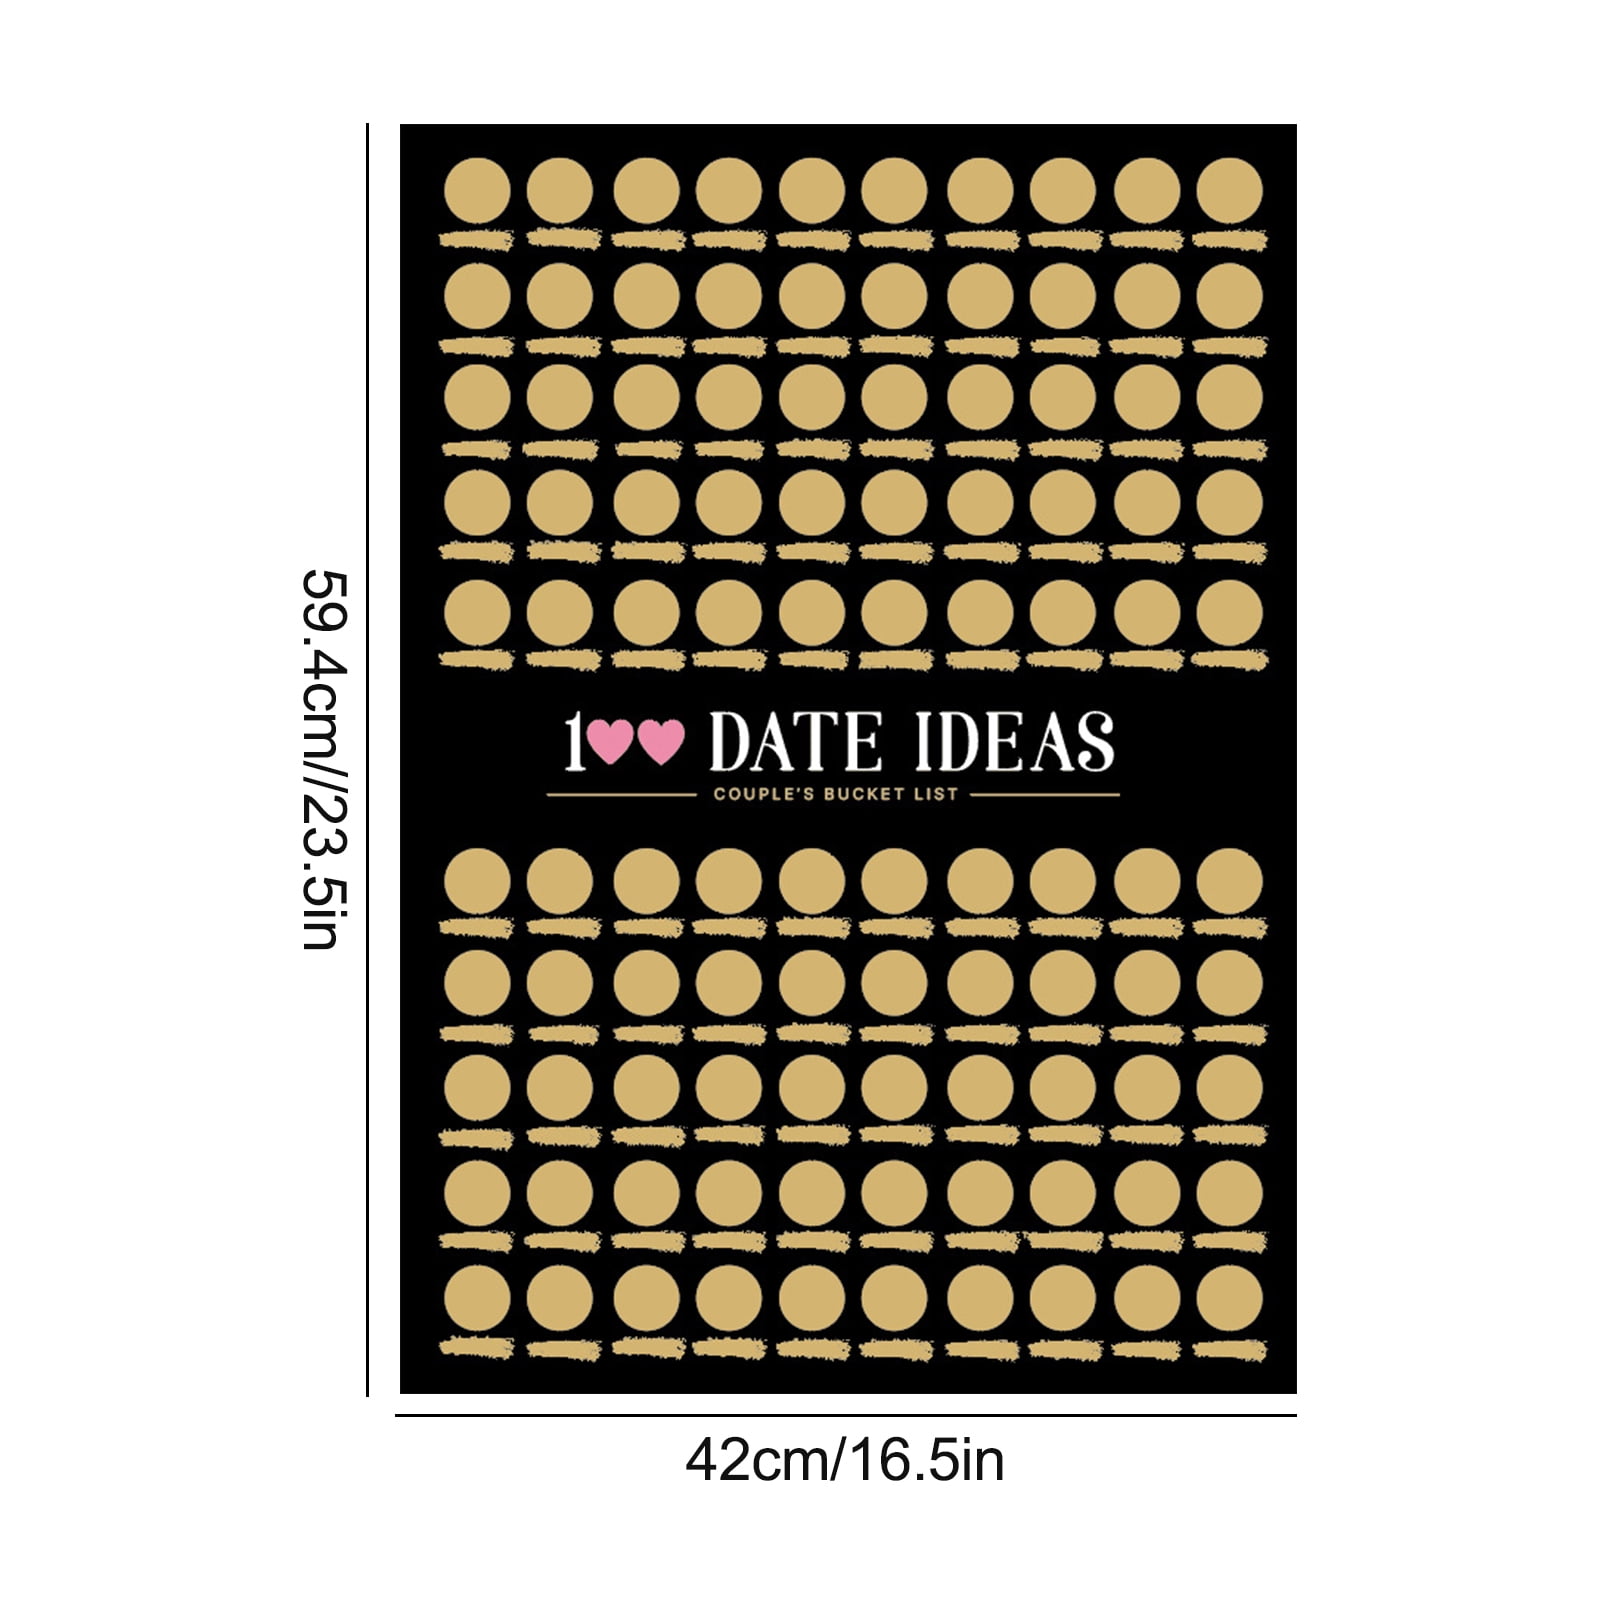 100 Dates Scratch Off Poster - Engagement Gift, Gifts for Her, Husband Gifts, Gifts for Men, Stocking Stuffers for Women, Birthday Gifts for Women, Co